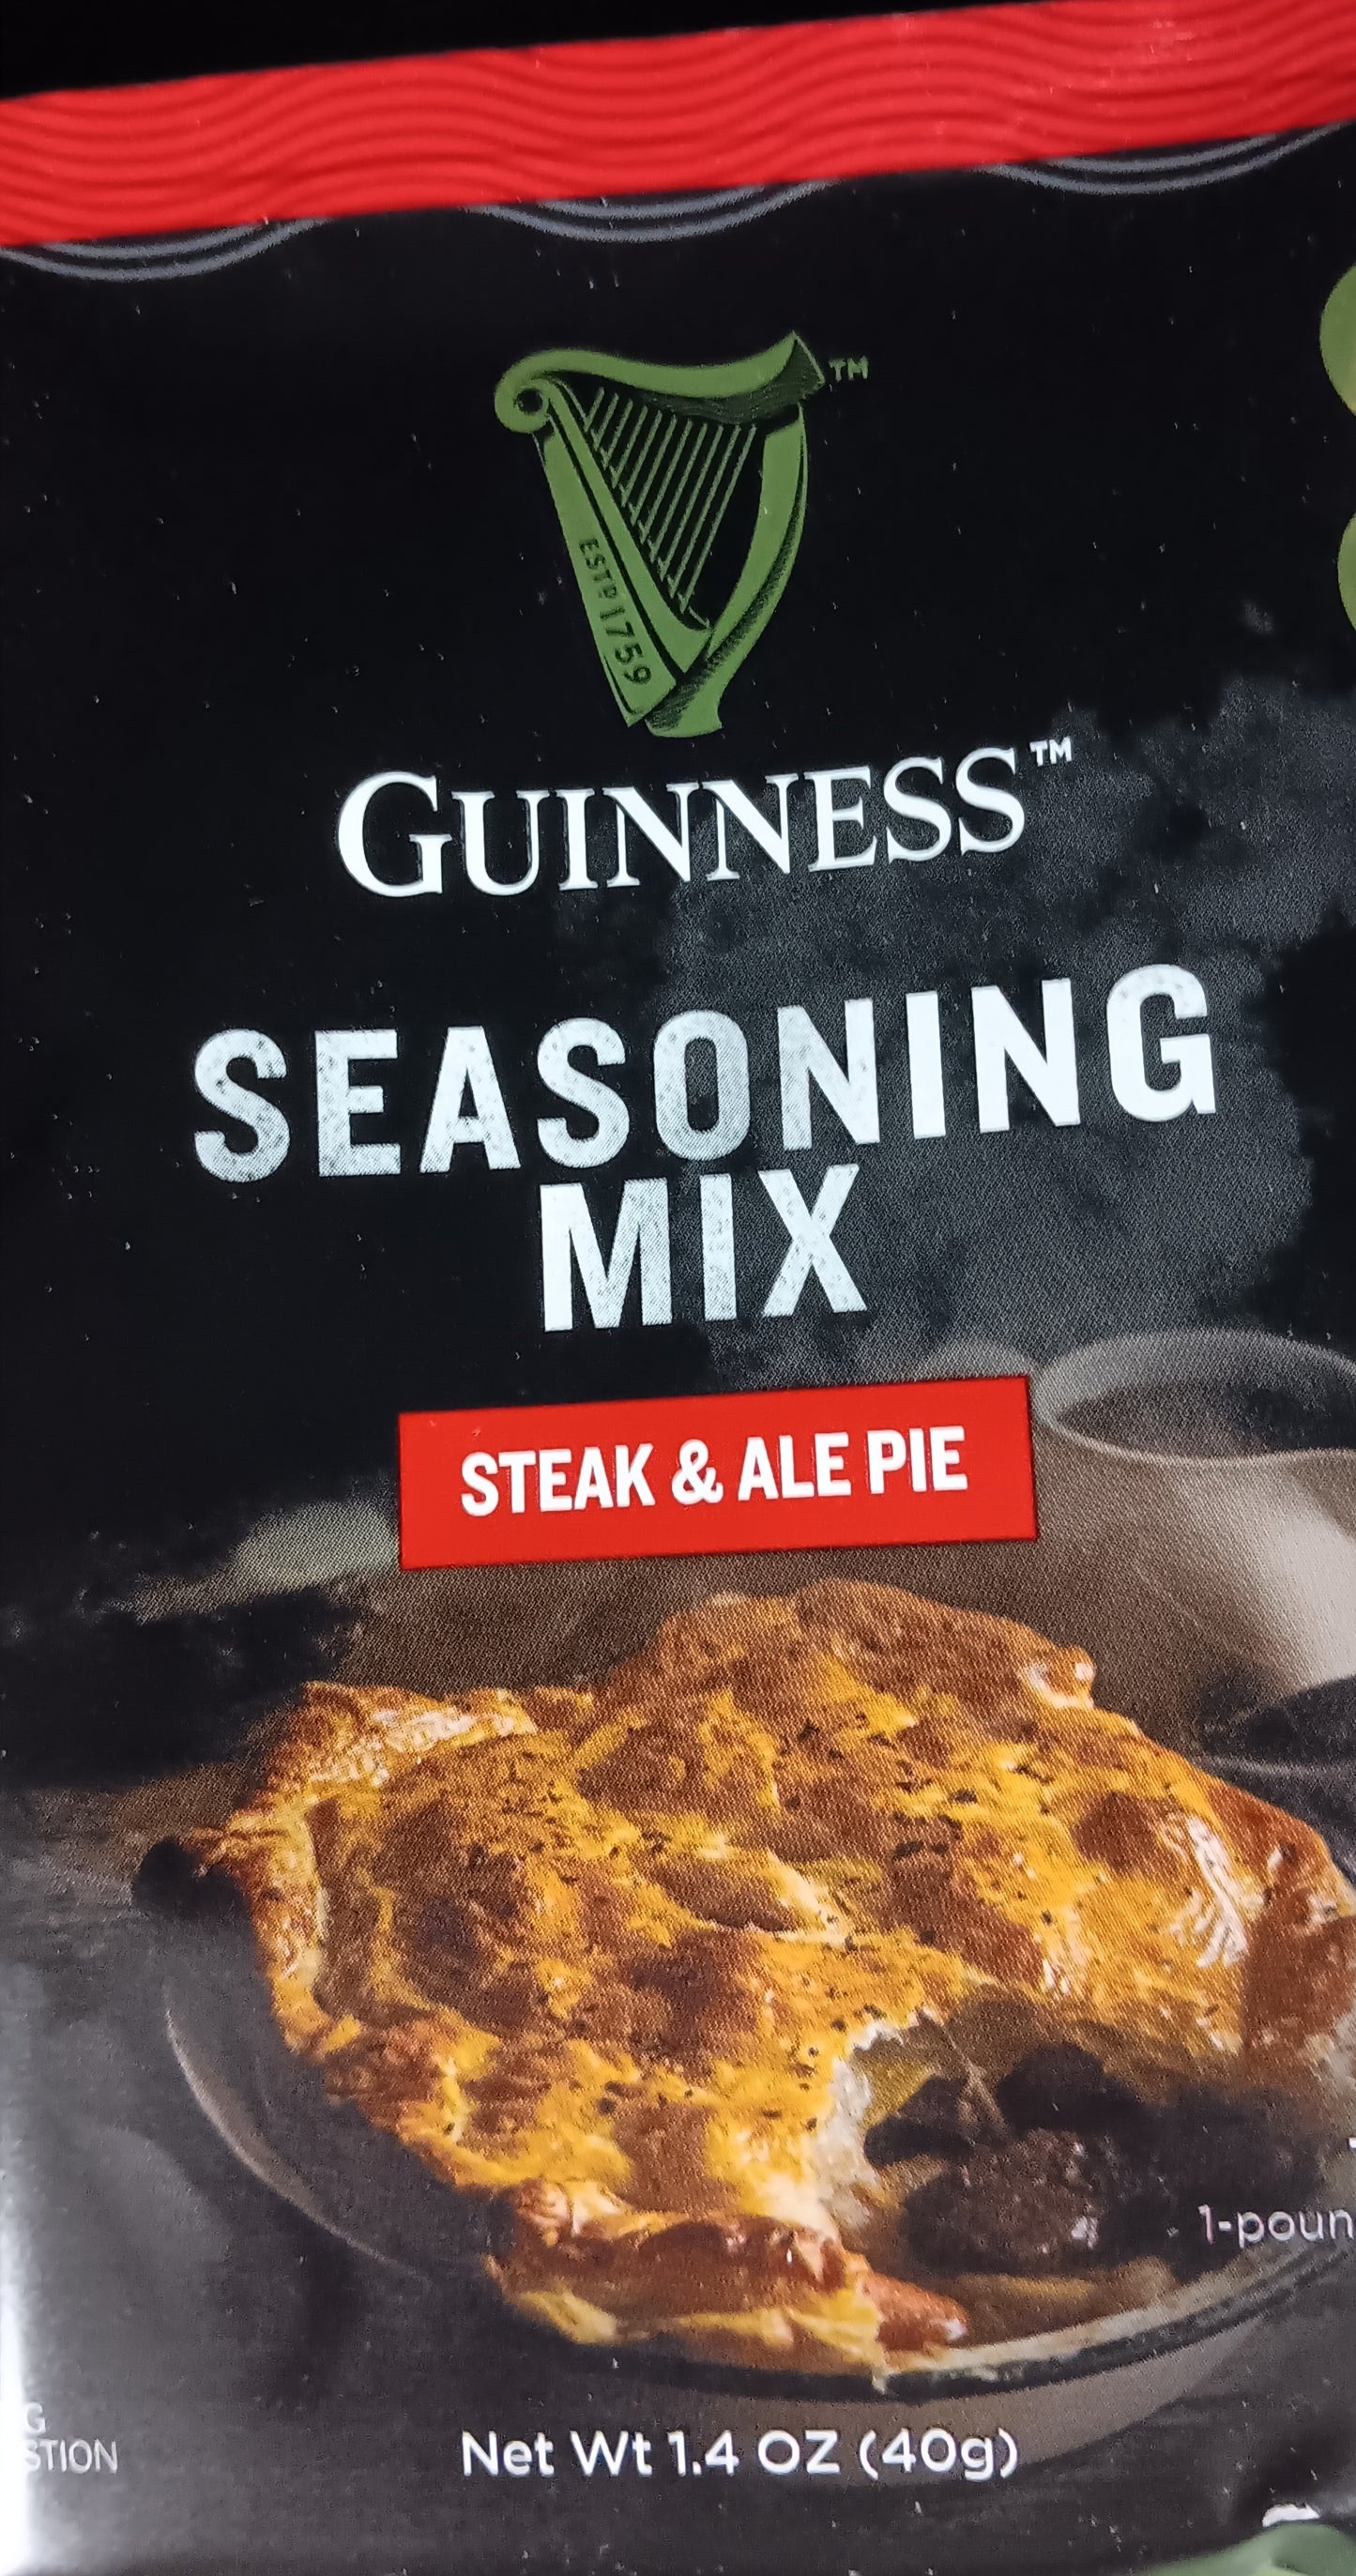 Guinness Seasoning Mix Steak and Ale Pie